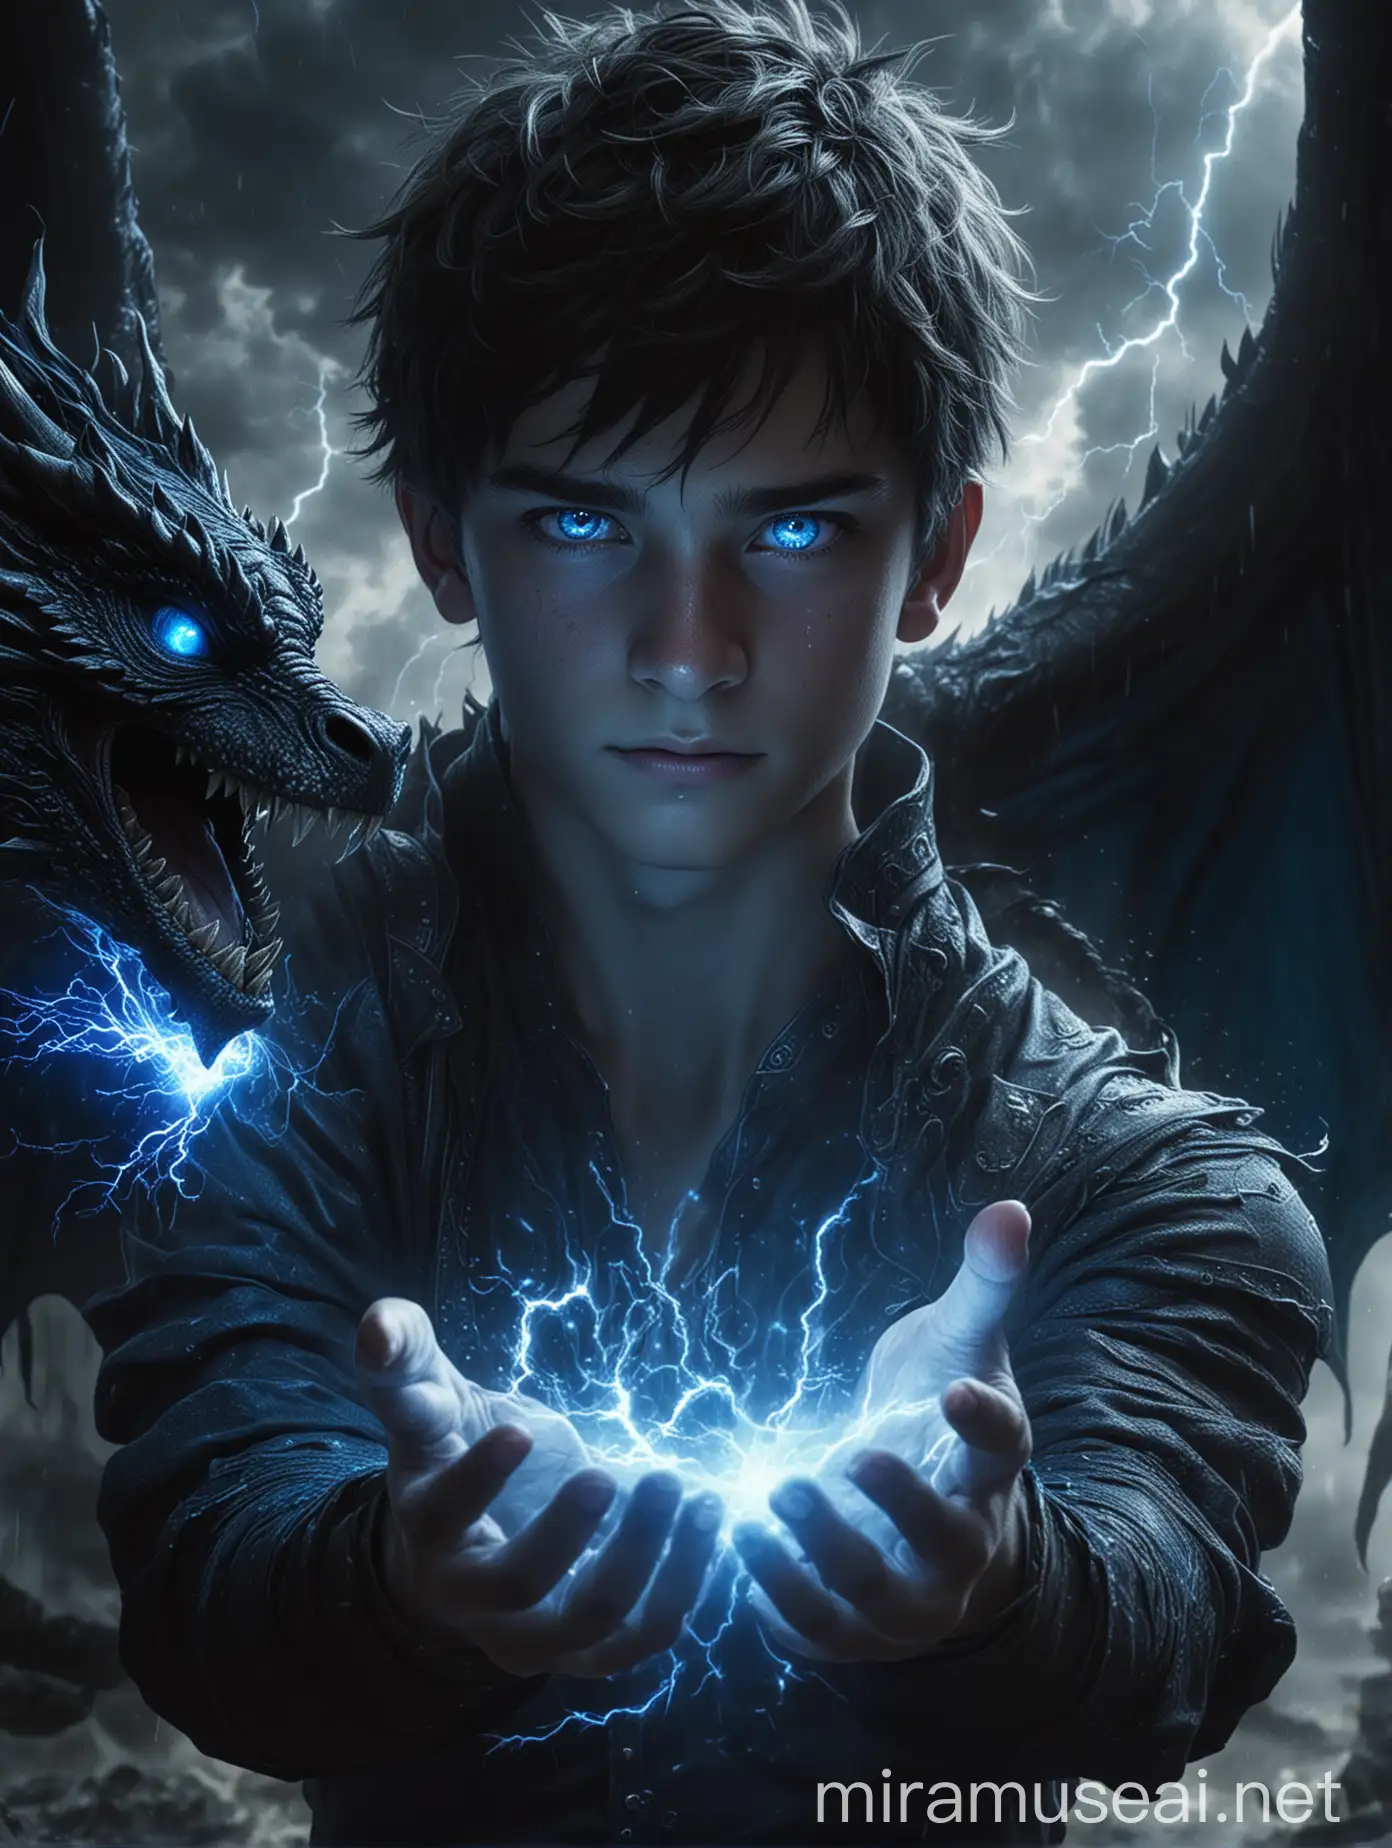 generate a realistic image of a 17-year old boy who is a prince, there is blue lightning coming out of his hands, and behind him there is a black dragon with blue eyes